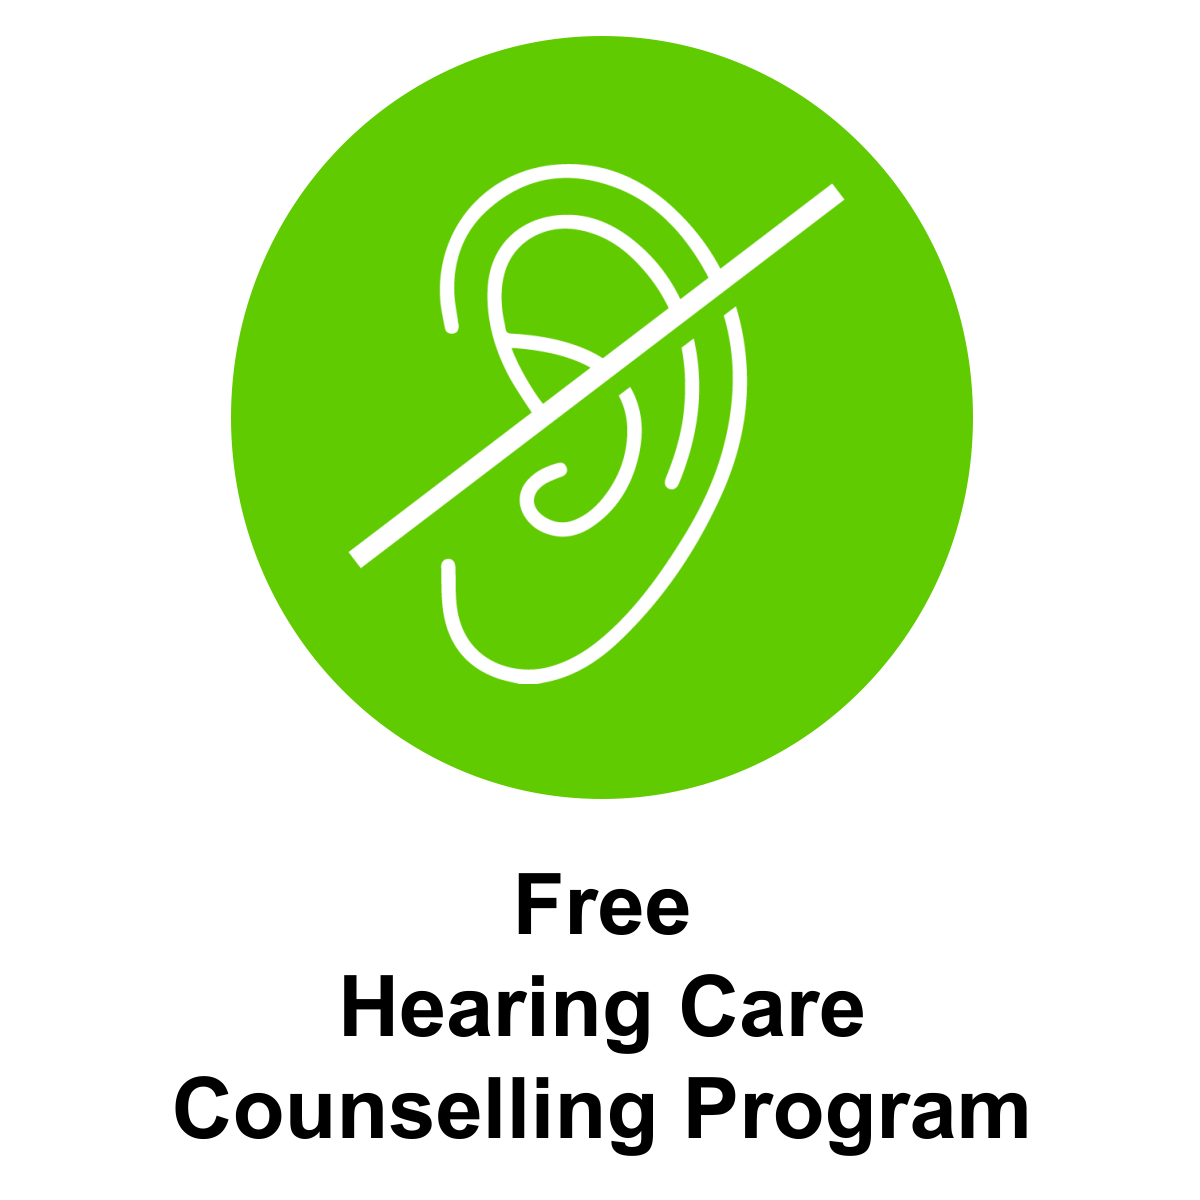 image of a green circle with a white icon of an ear with a slash through it. Text reads: Free Hearing Care Counselling Program.